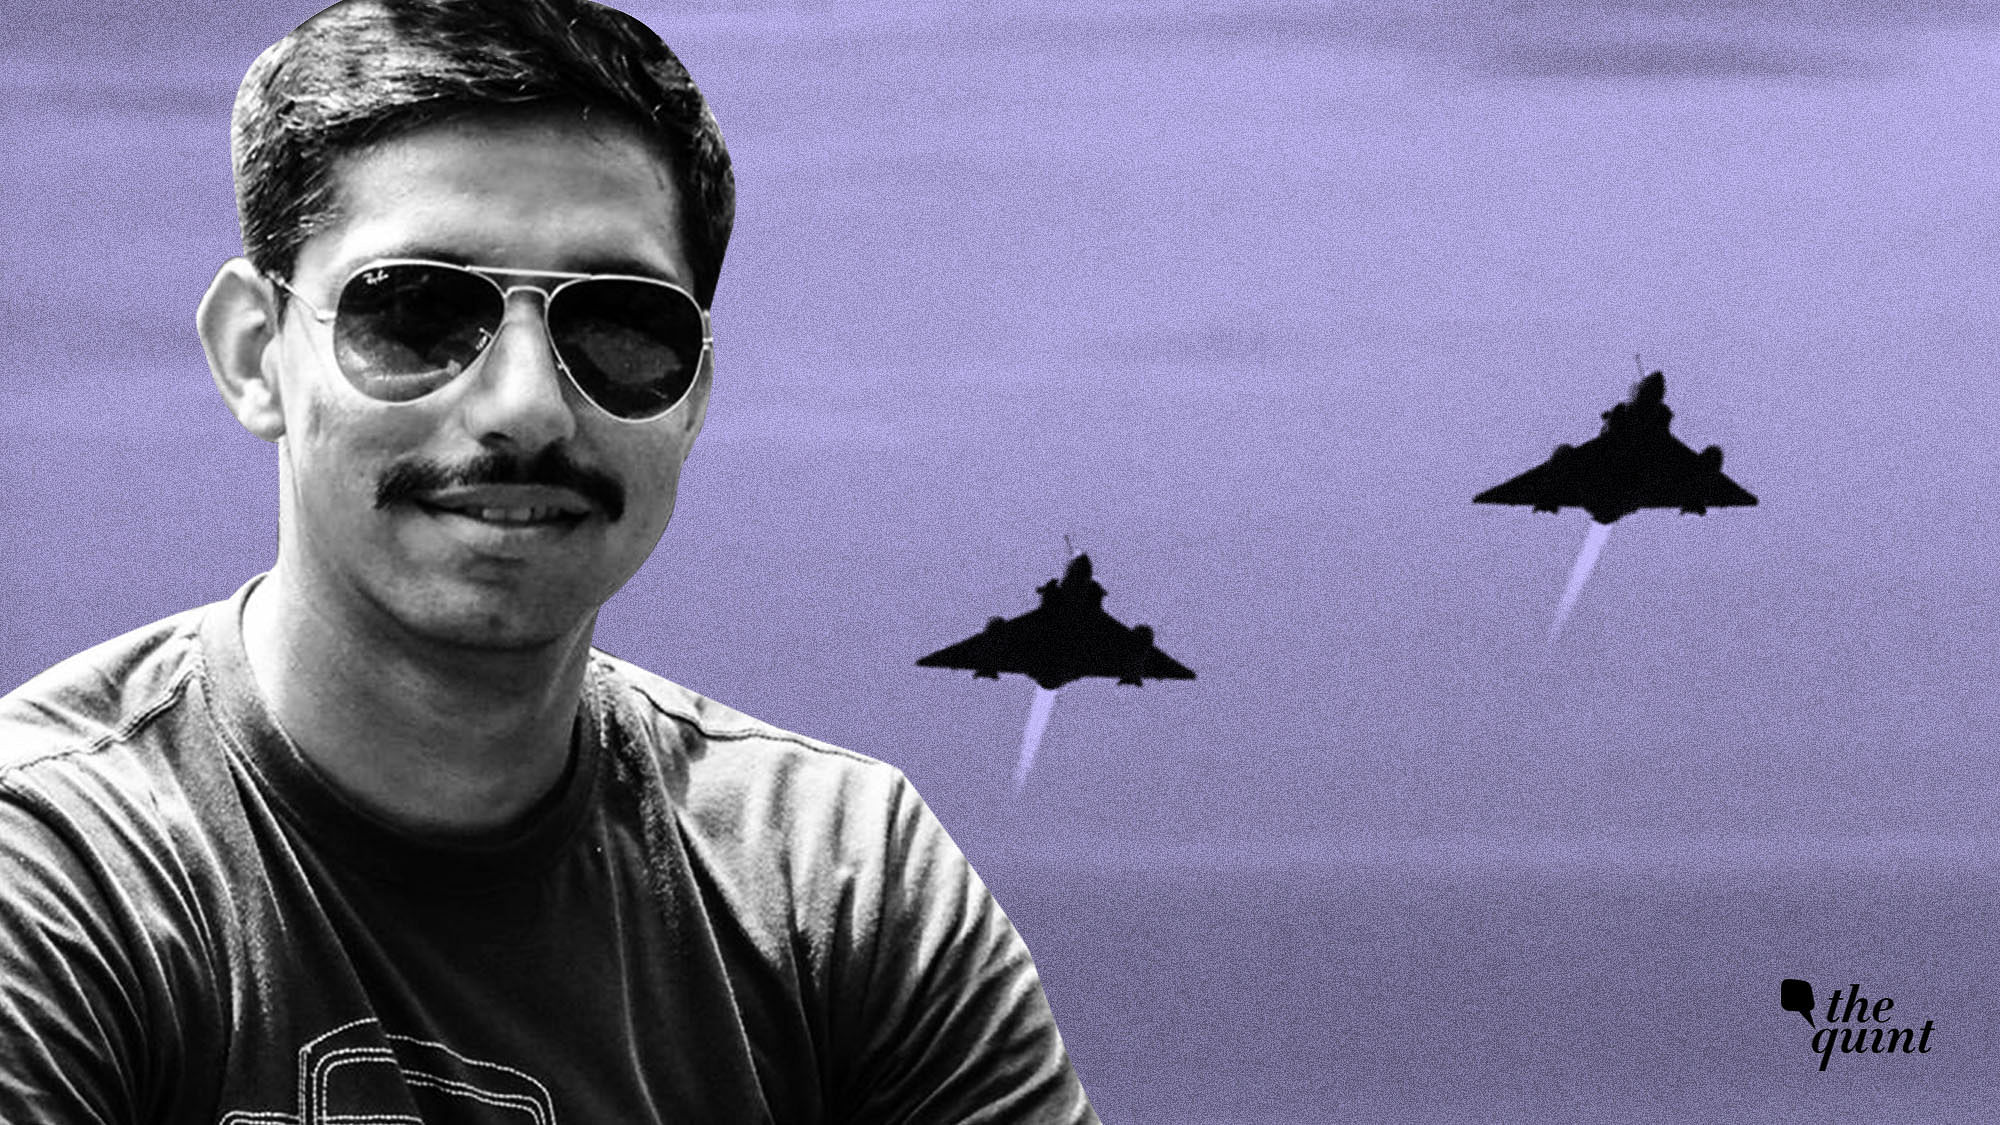 Squadron leader Samir Abrol died in the Mirage 2000 aircraft crash on Friday.